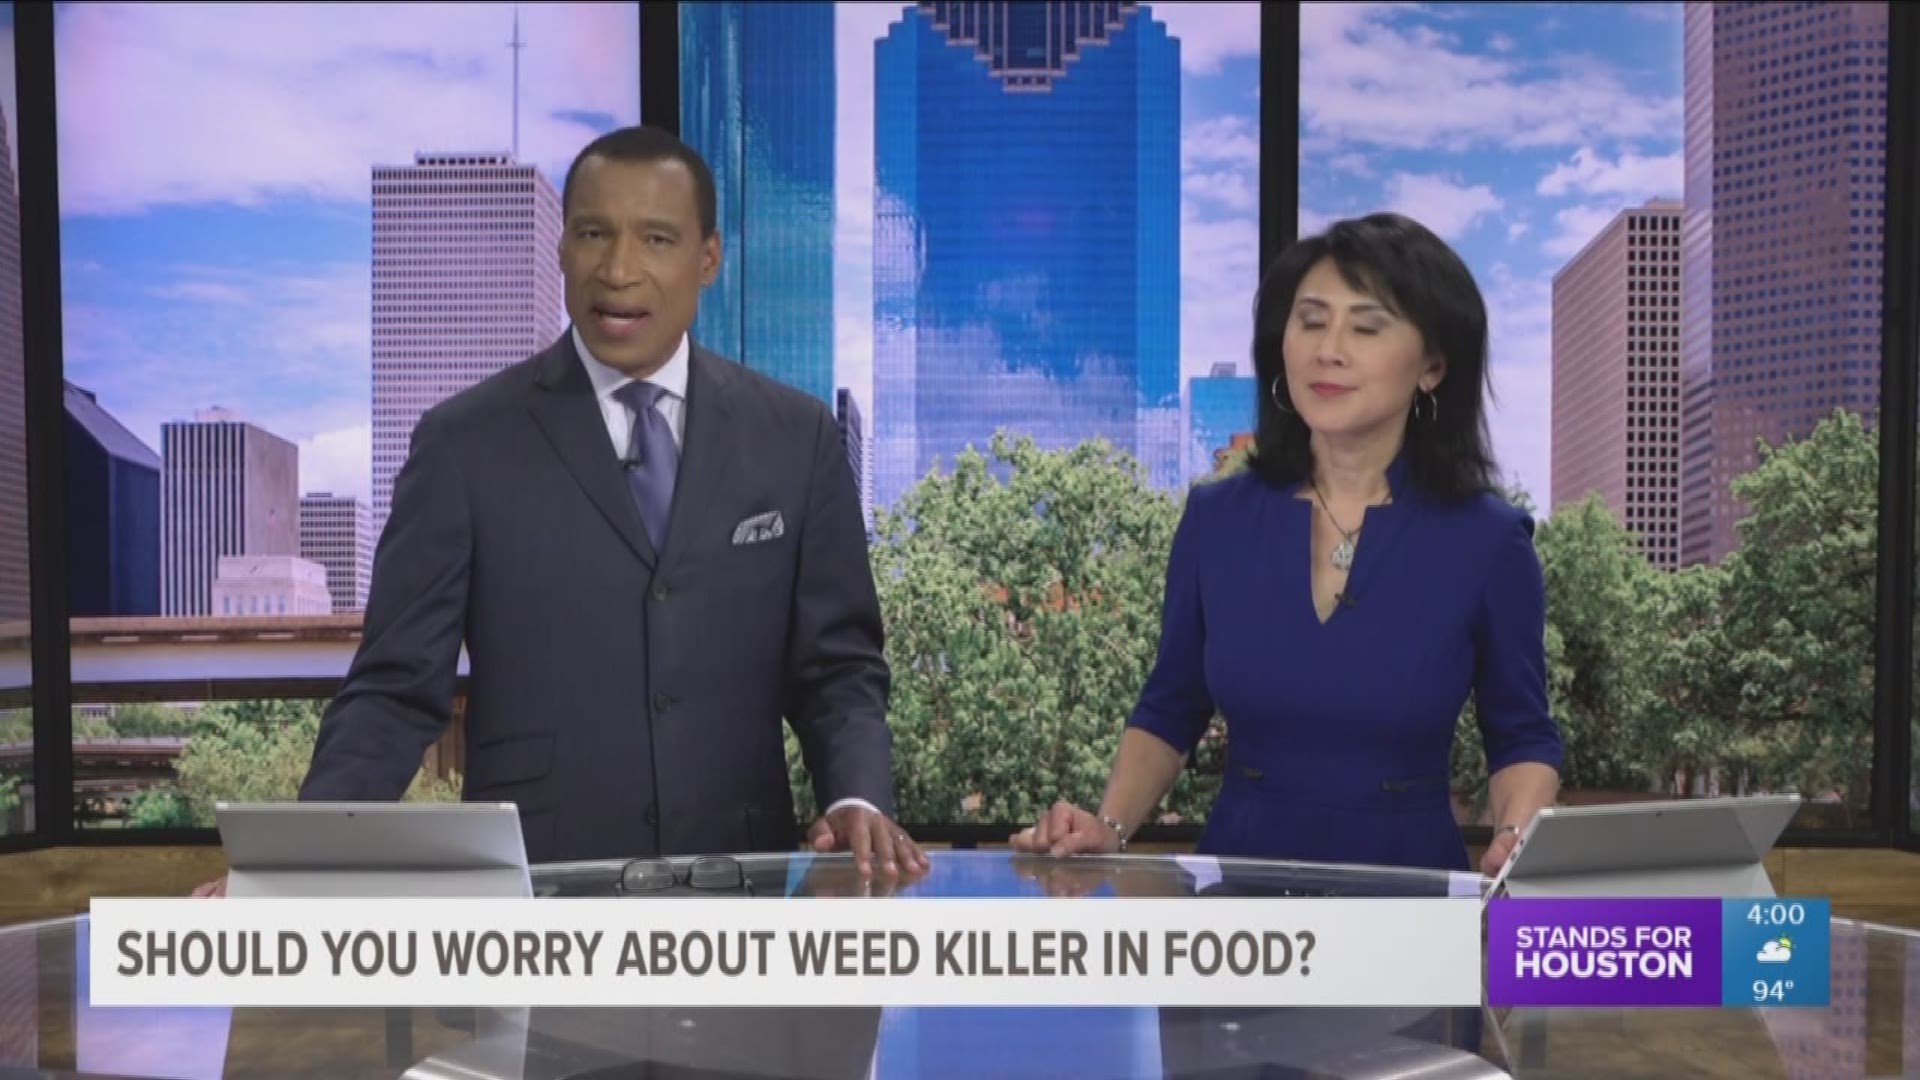 Top headlines include "Should You Worry About Weed Killer in Food?" and "Remembering Aretha Franklin".